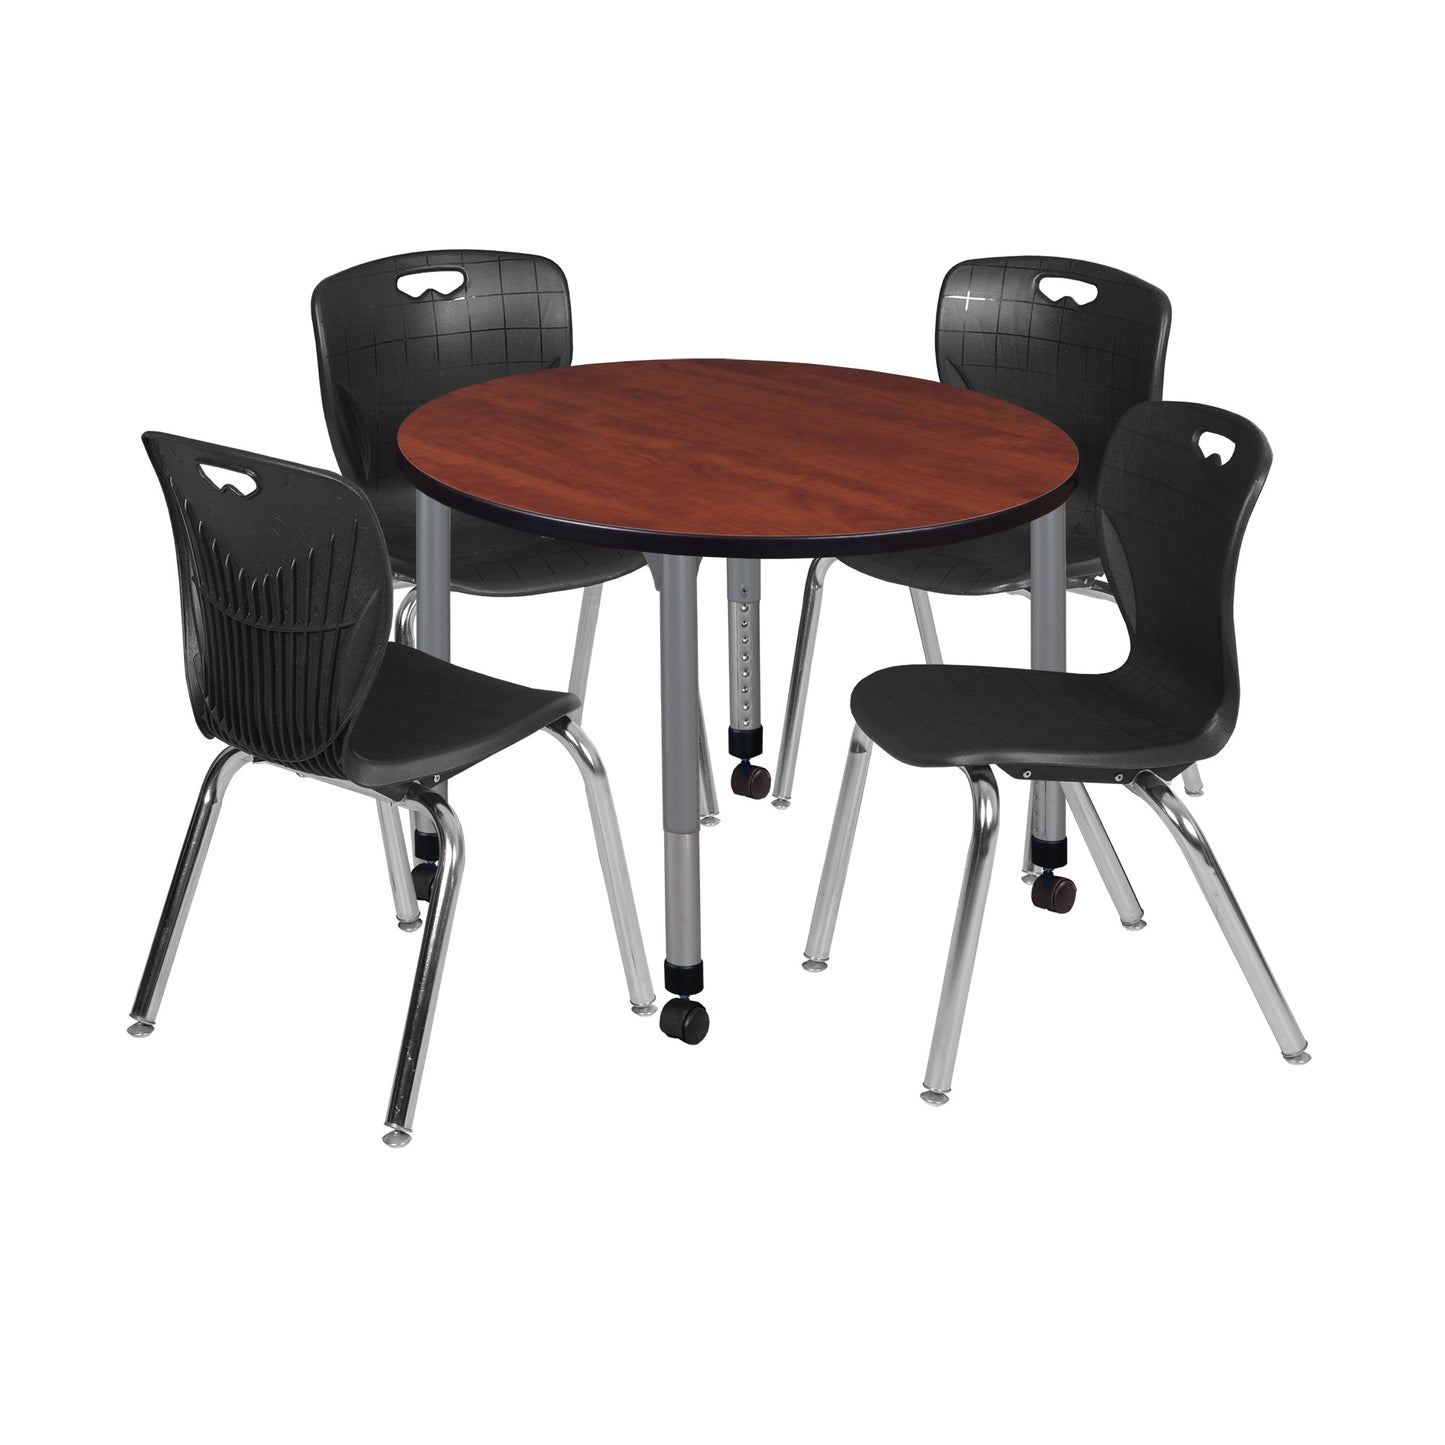 Regency Kee 42 in. Round Adjustable Classroom Table & 4 Andy 18 in. Stack Chairs